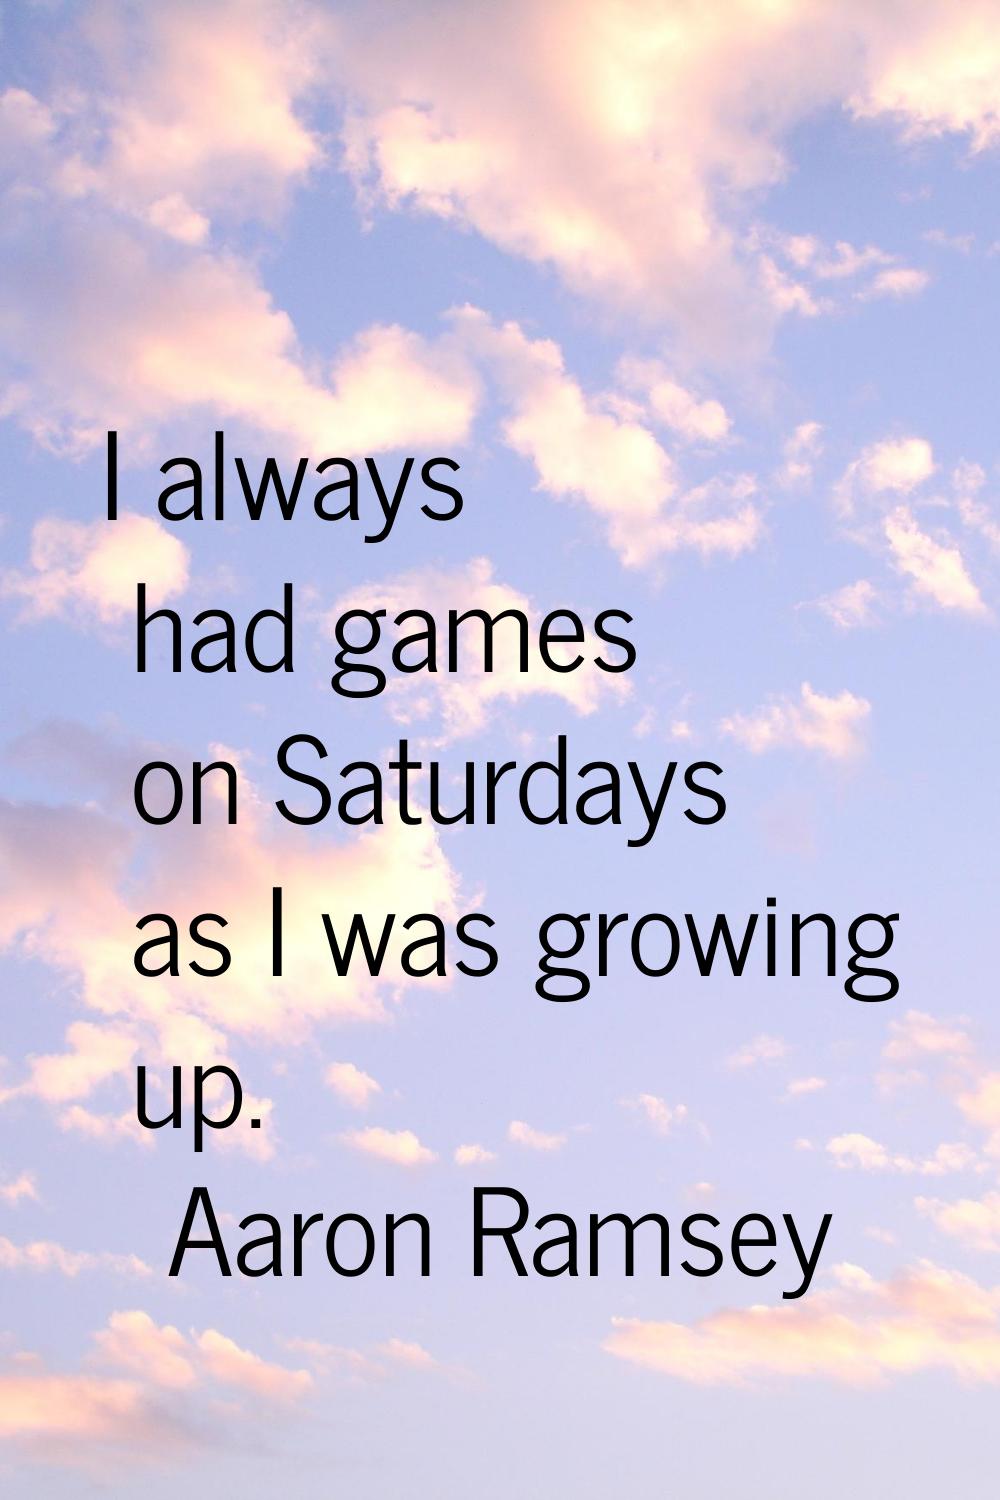 I always had games on Saturdays as I was growing up.